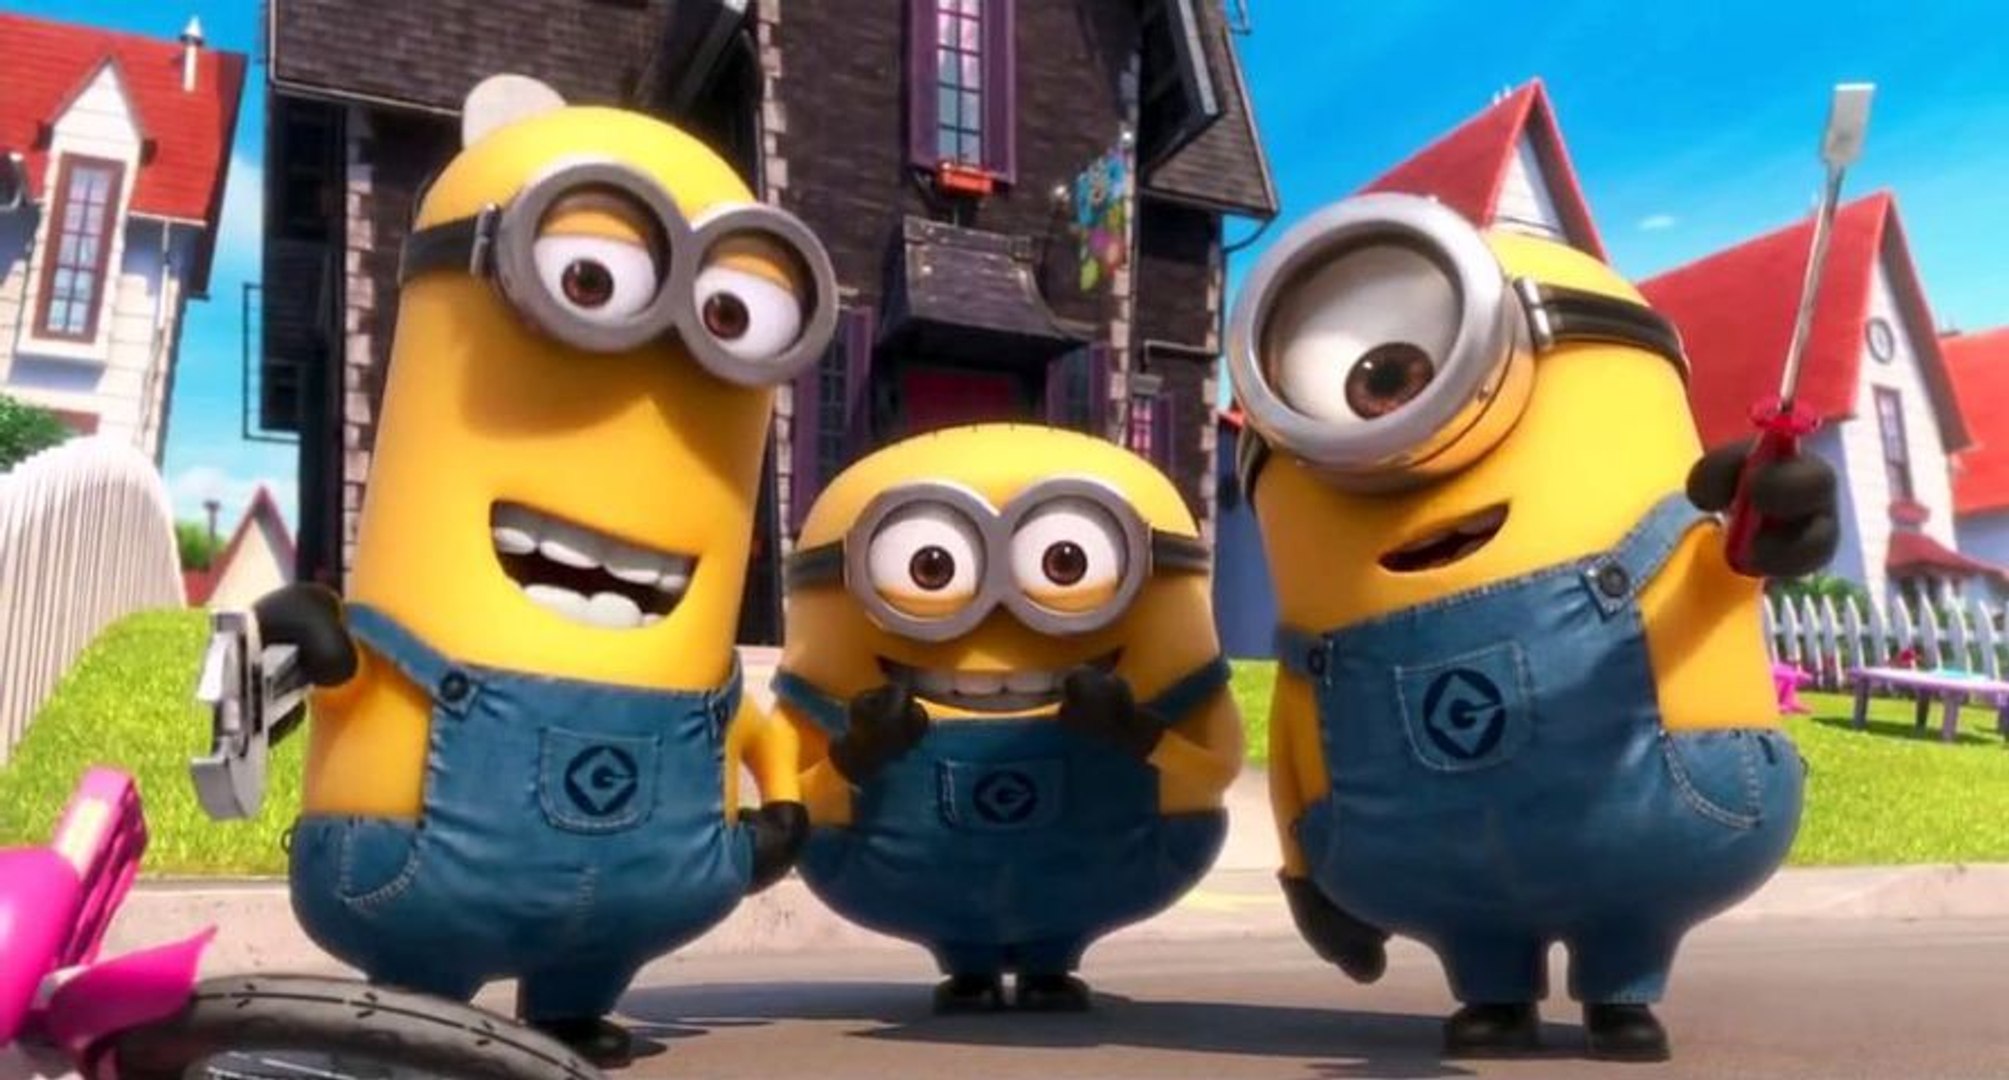 Making Of Despicable Me 2 The Mini-Movies - video Dailymotion